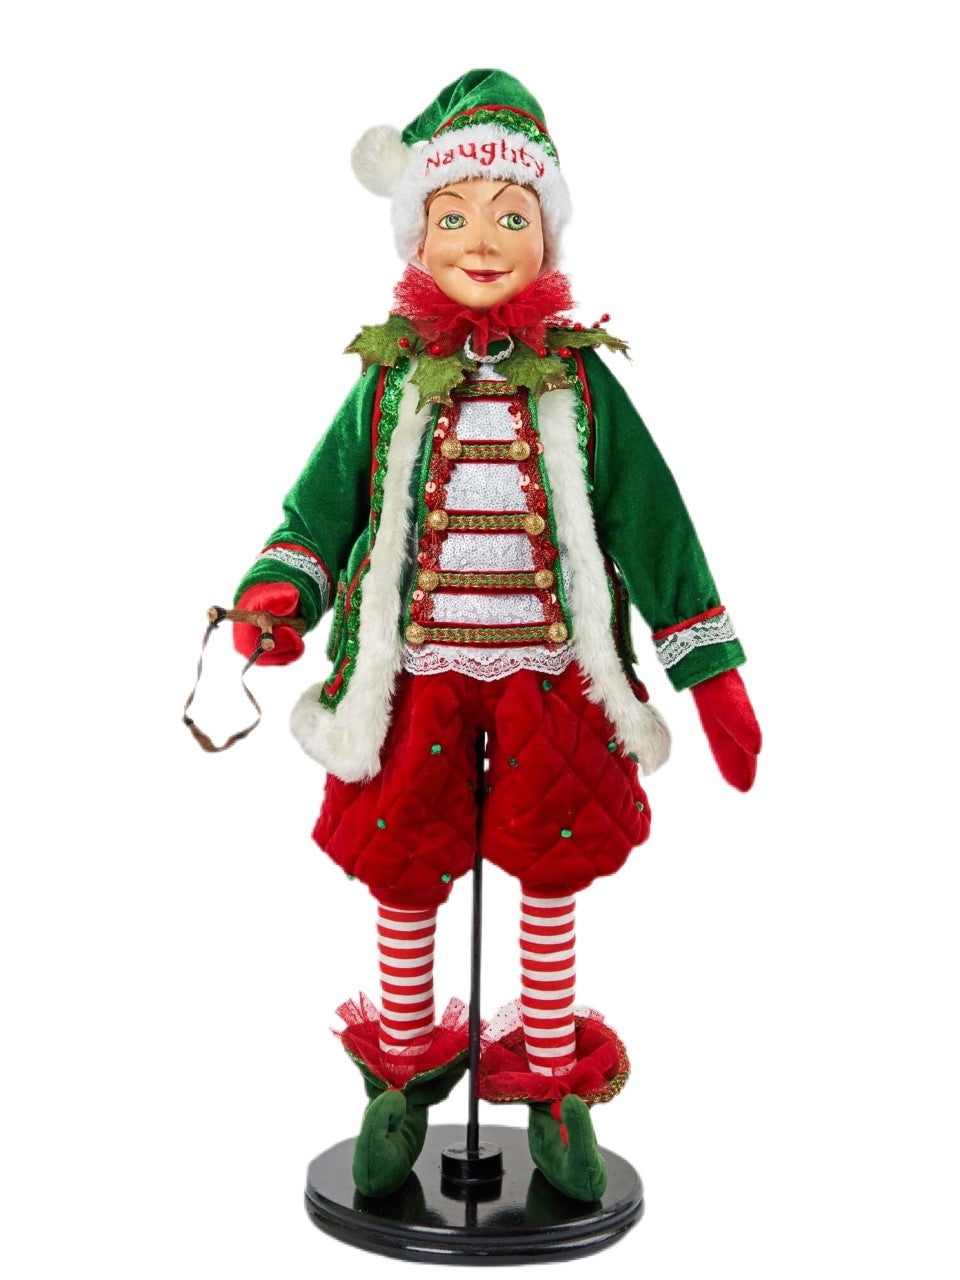 26" Naughty Elf Poseable Doll